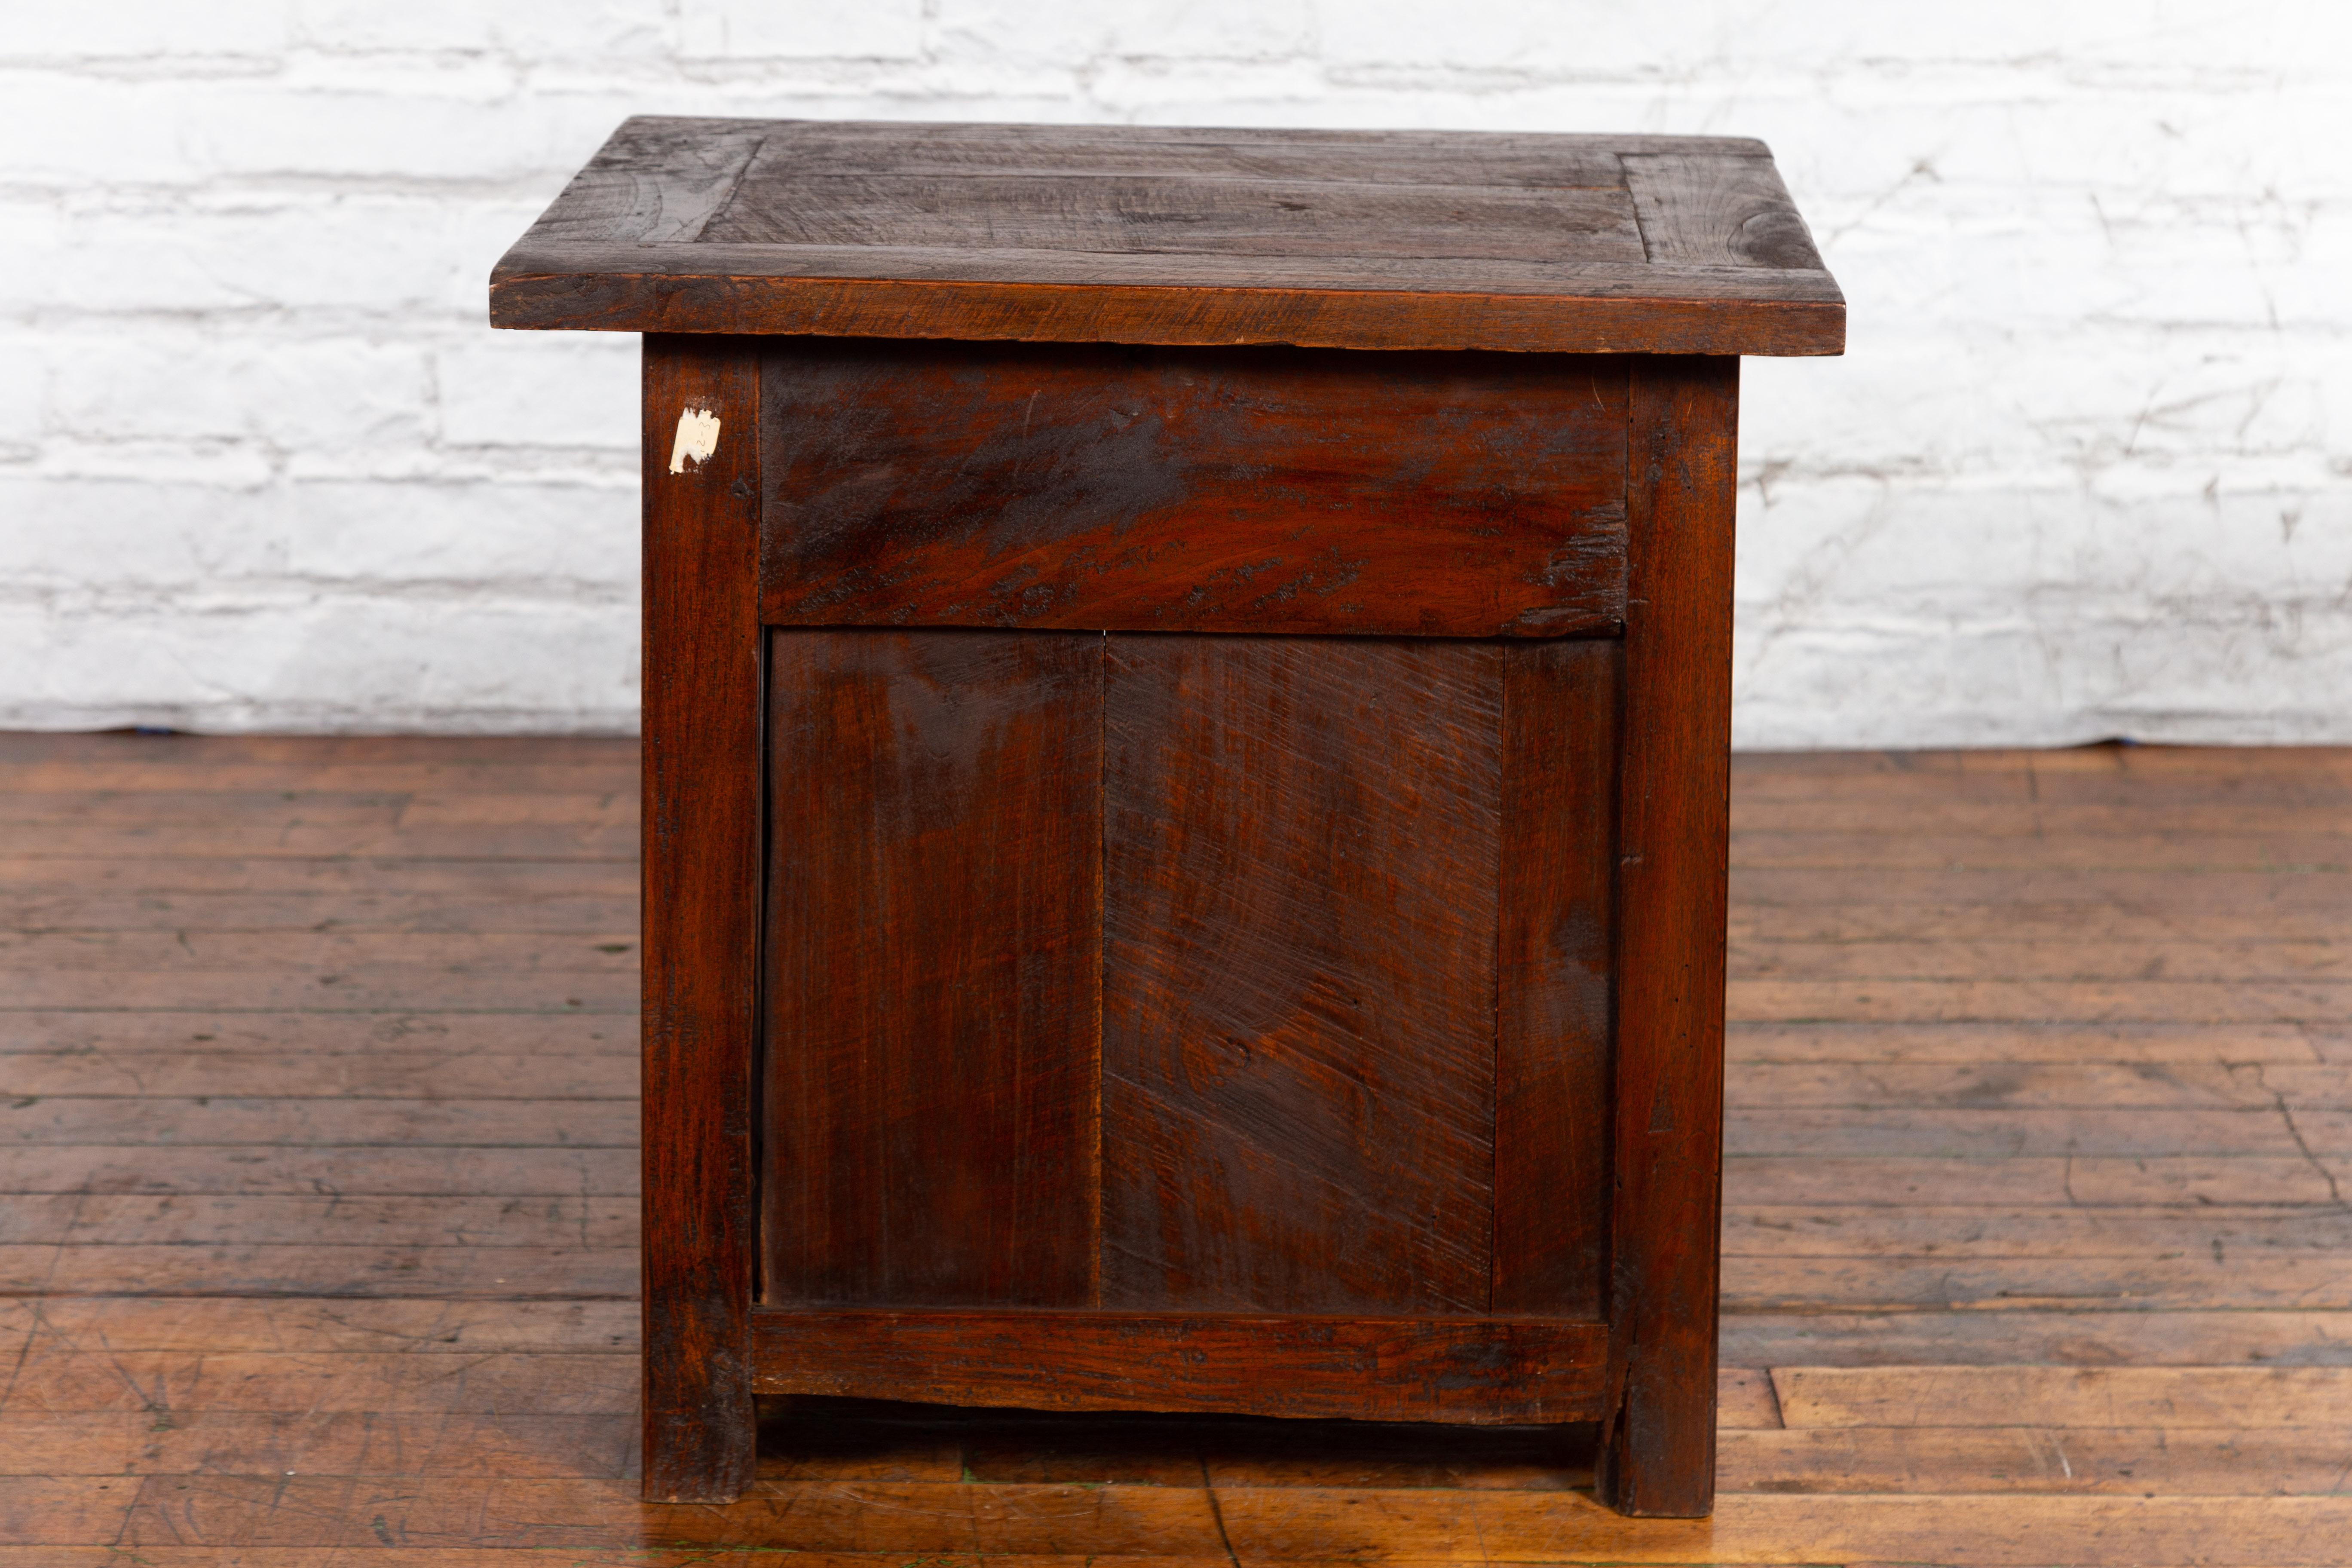 Javanese Early 20th Century Rustic Bedside Cabinet with Drawer and Open Shelf For Sale 6